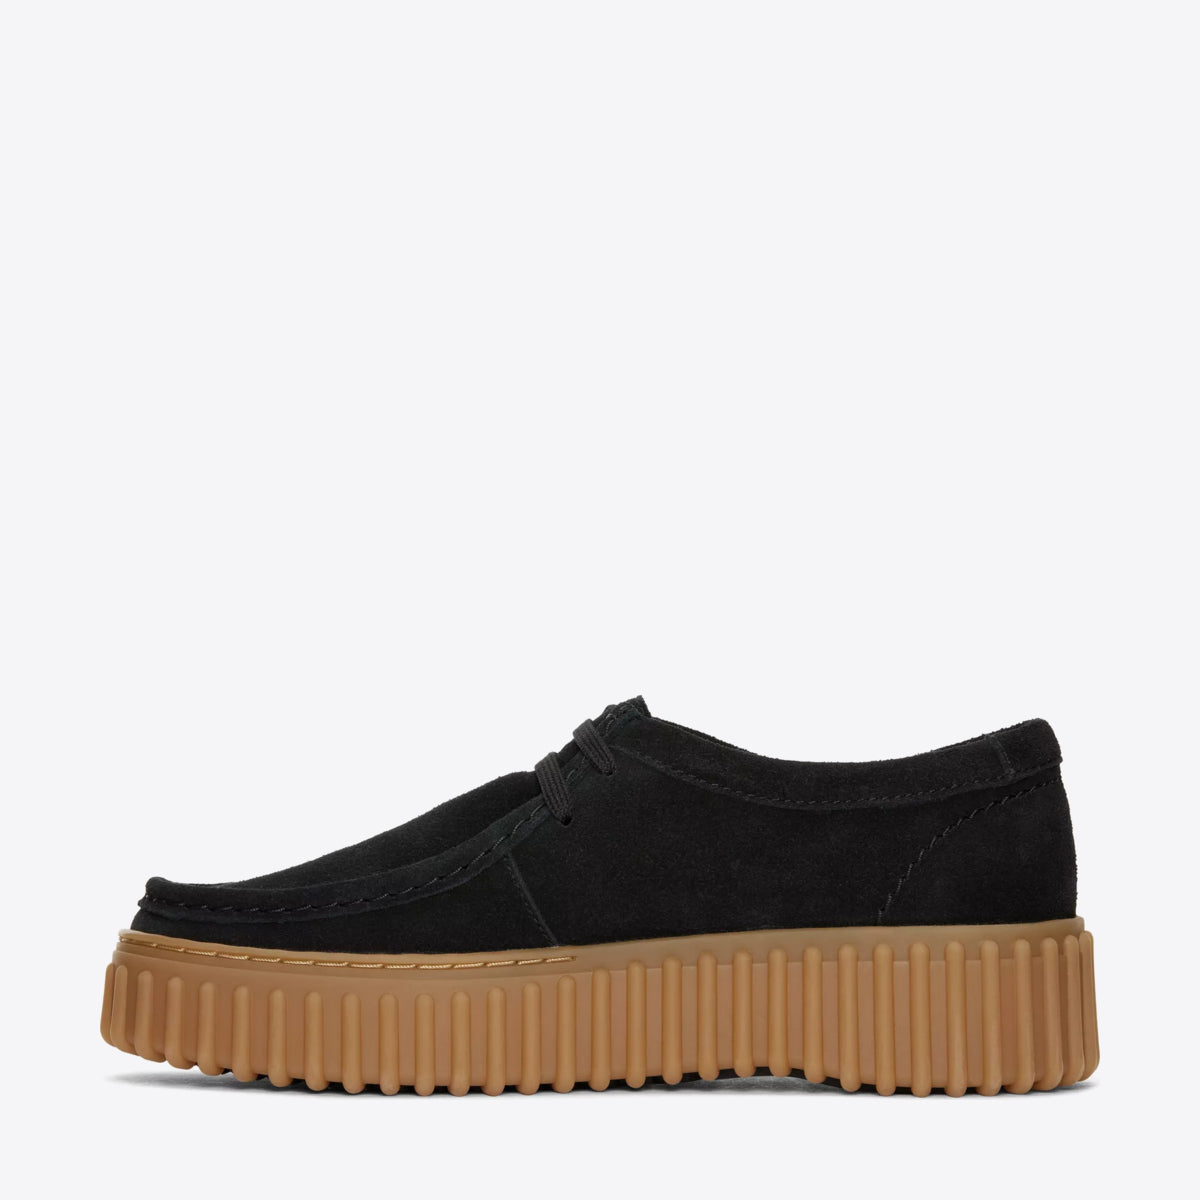 CLARKS Womens Torhill Bee Black Suede - Image 2